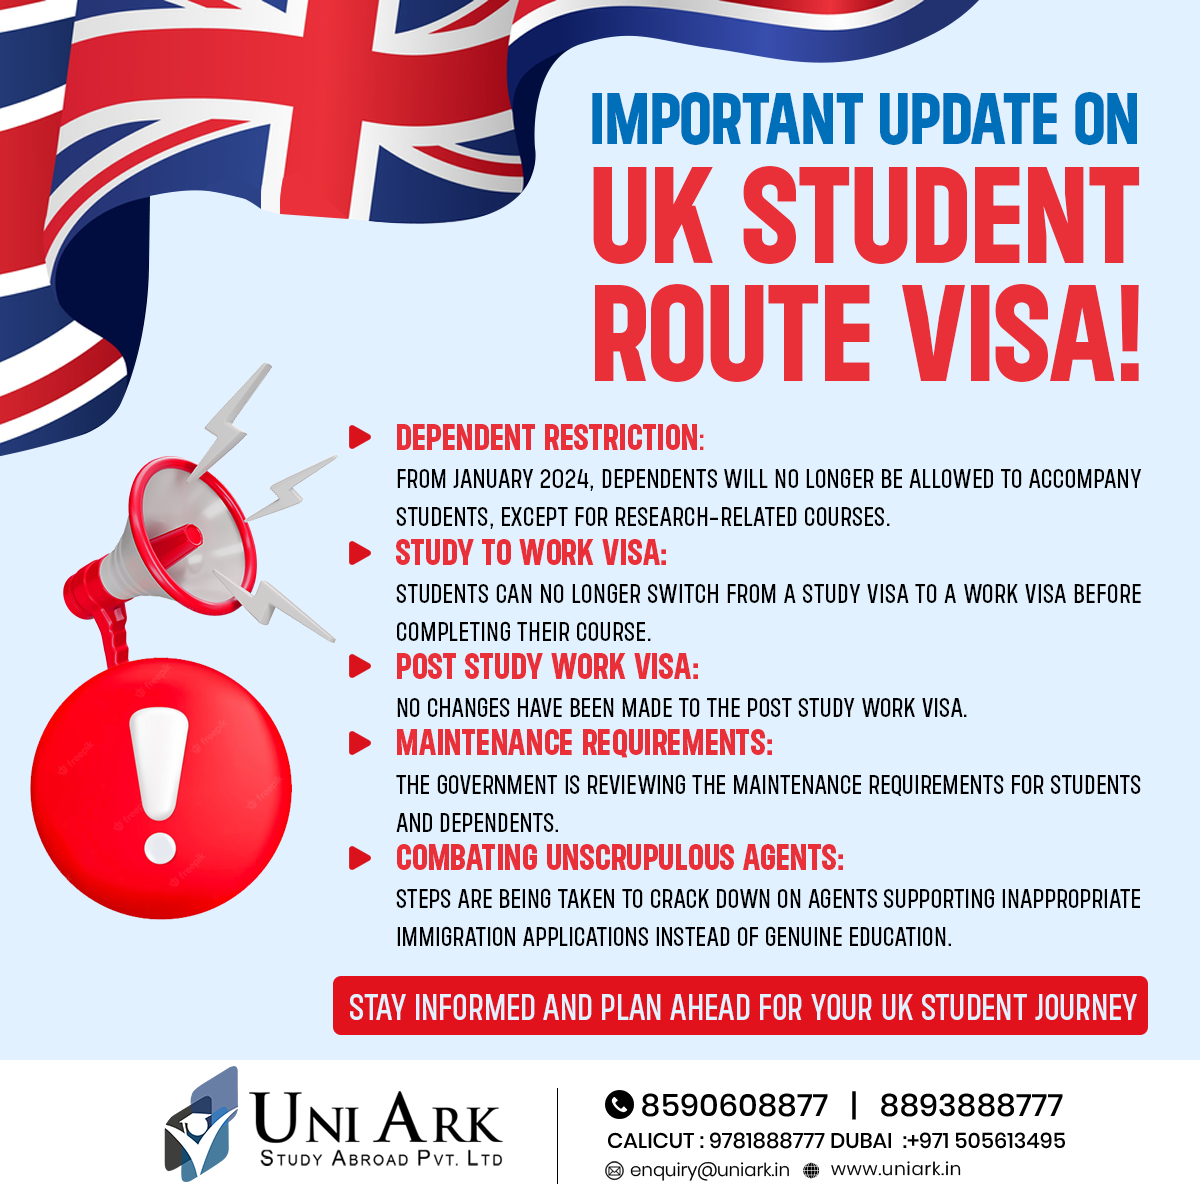 The new rules for the UK Student Visa in 2024 have been updated, bringing significant changes to the application process and requirements. These changes aim to streamline the visa system and ensure that only genuine students are granted entry to the UK.